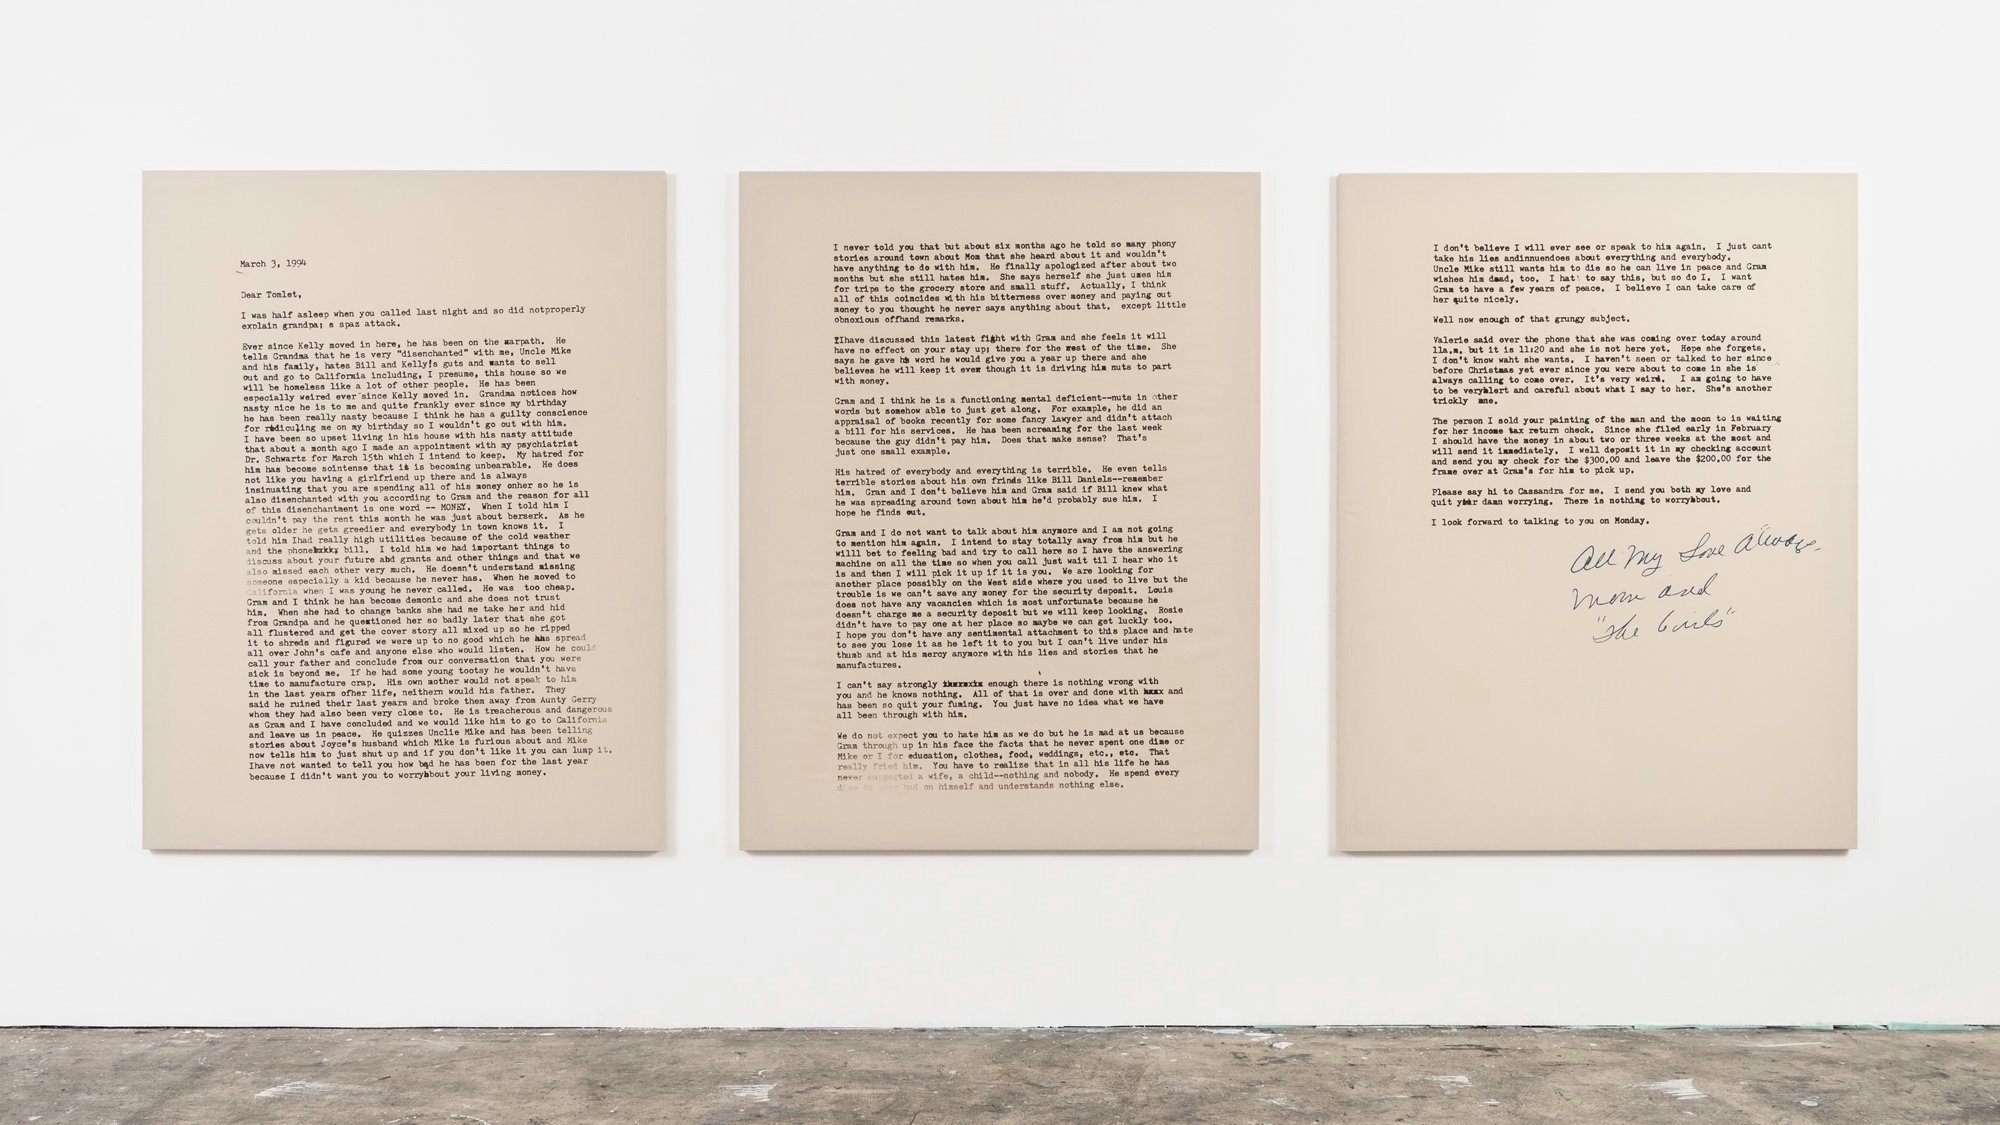   Letter (March 3, 1994),  2019 graphite, resin and funerary ash on muslin 78 × 60 inches (198 × 152.5 cm), each 